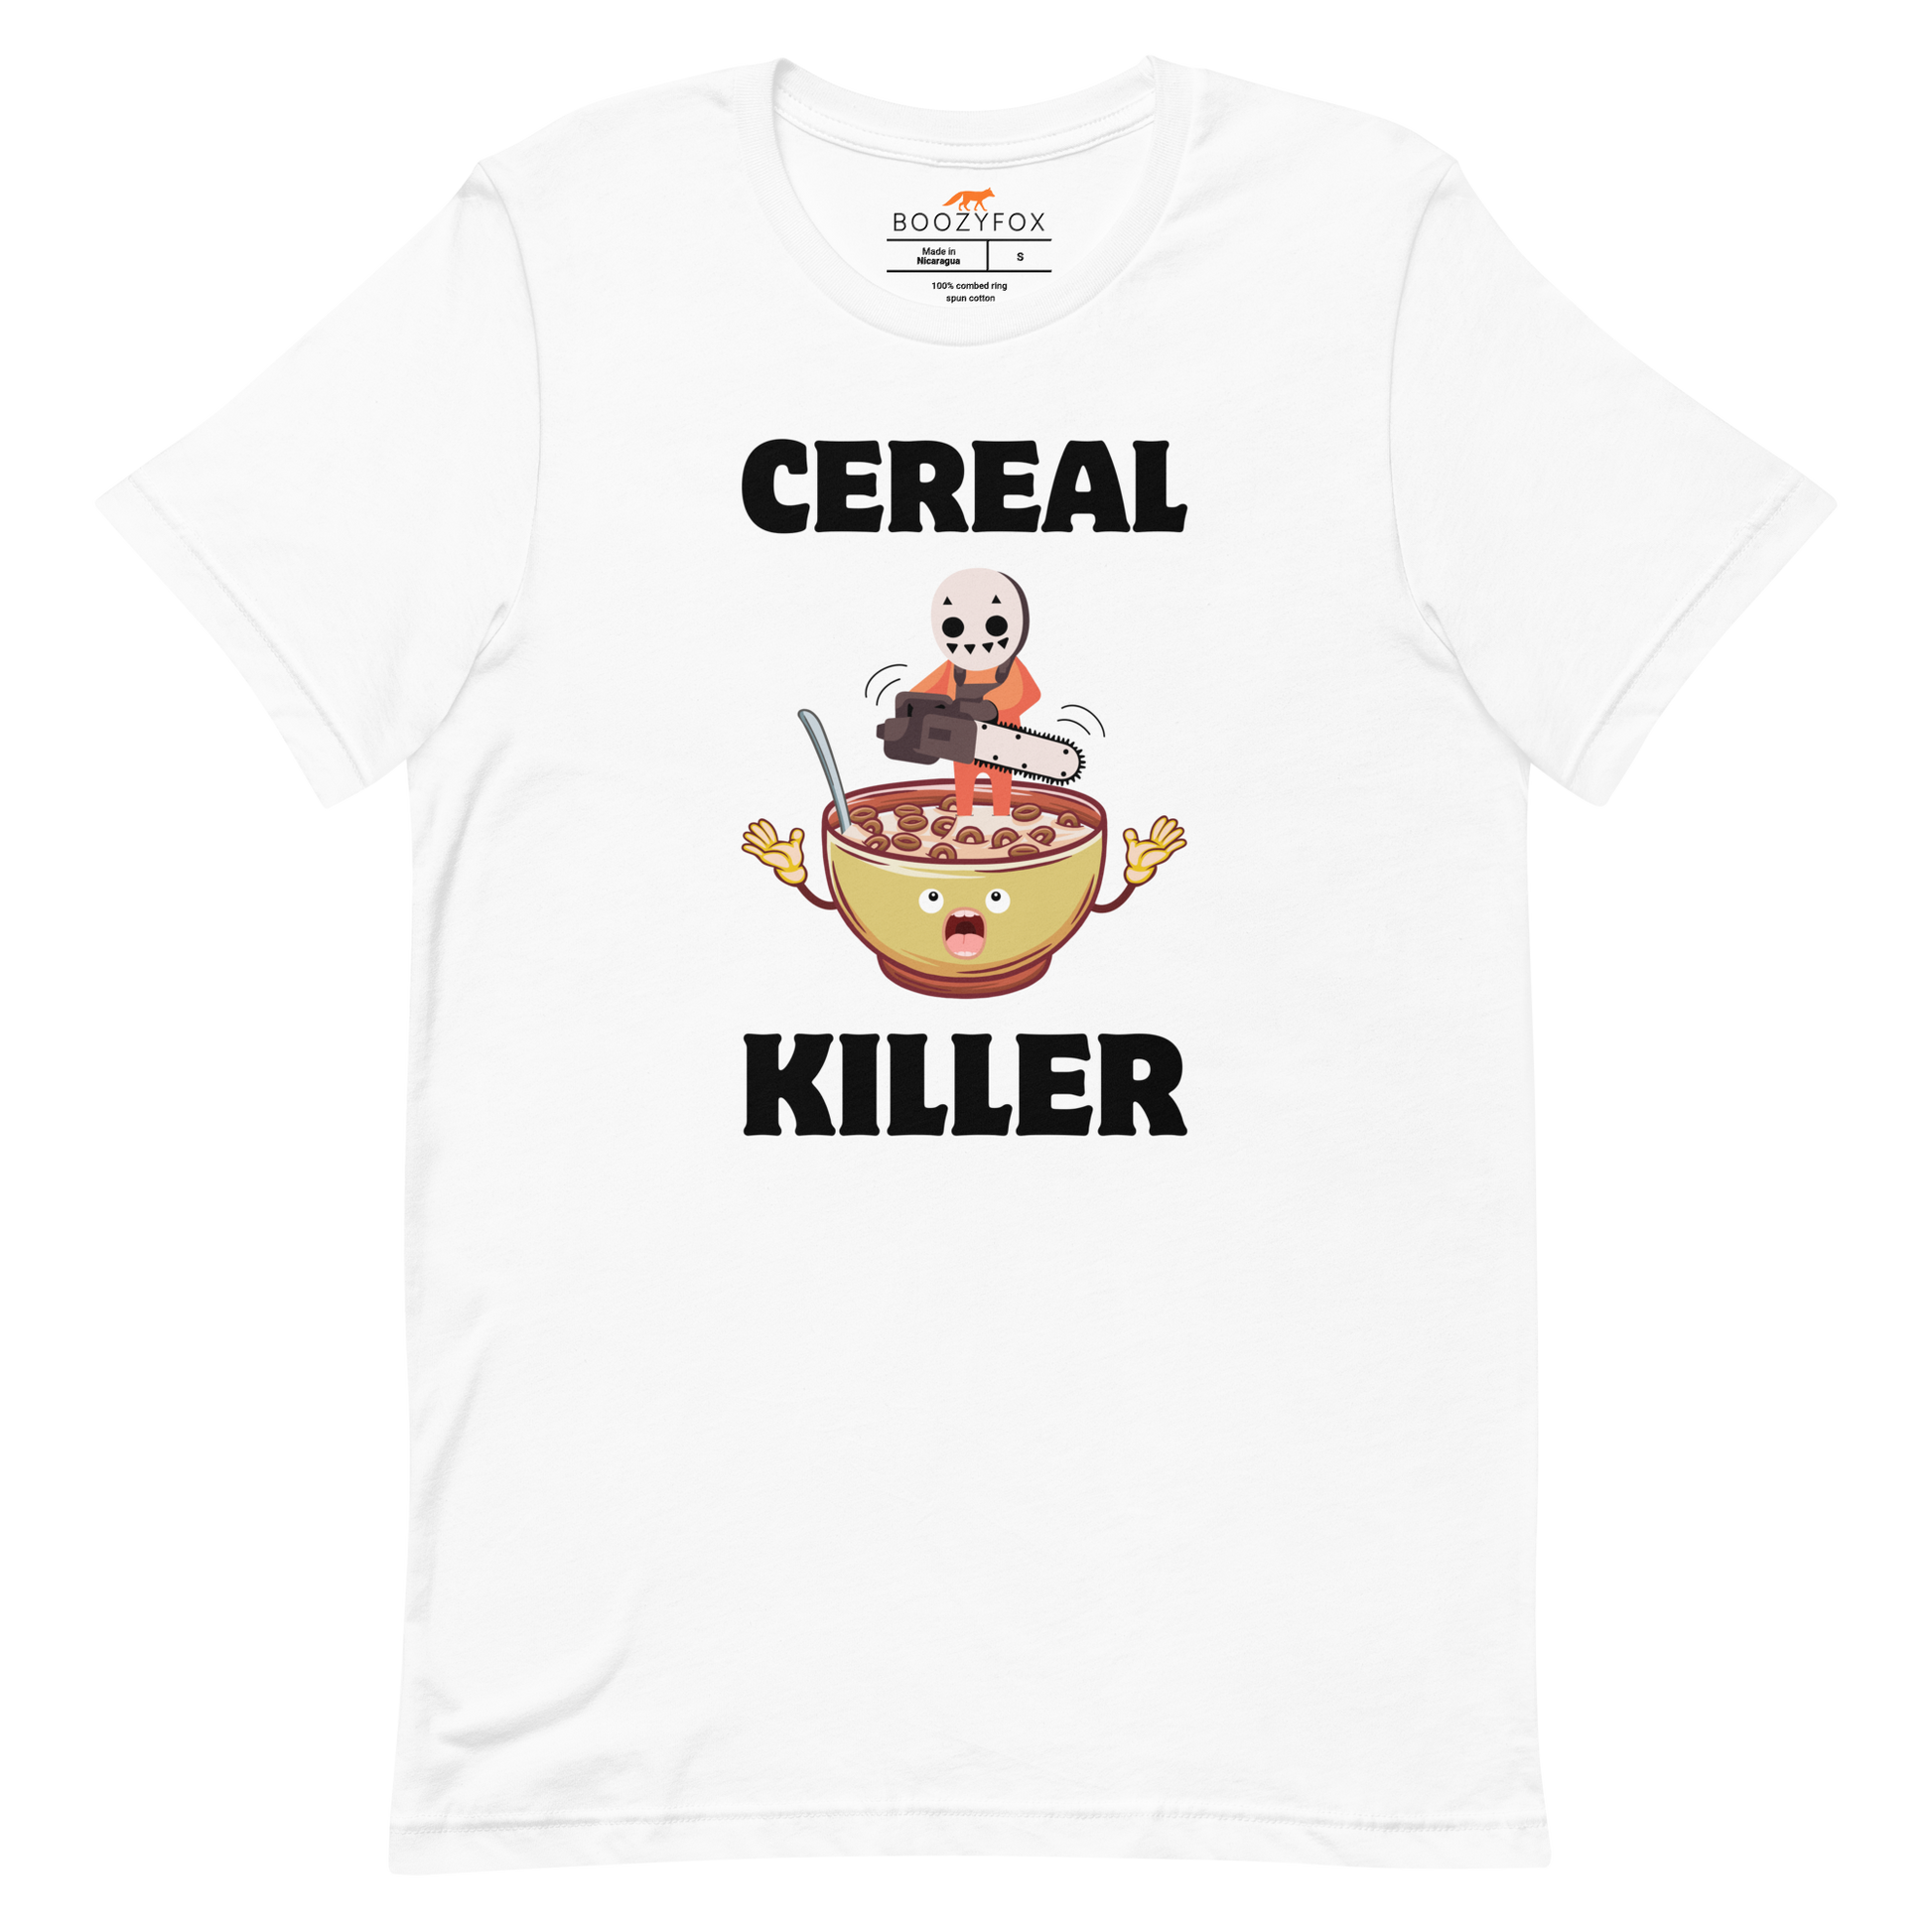 White Premium Cereal Killer Tee featuring a Cereal Killer graphic on the chest - Funny Graphic Tees - Boozy Fox